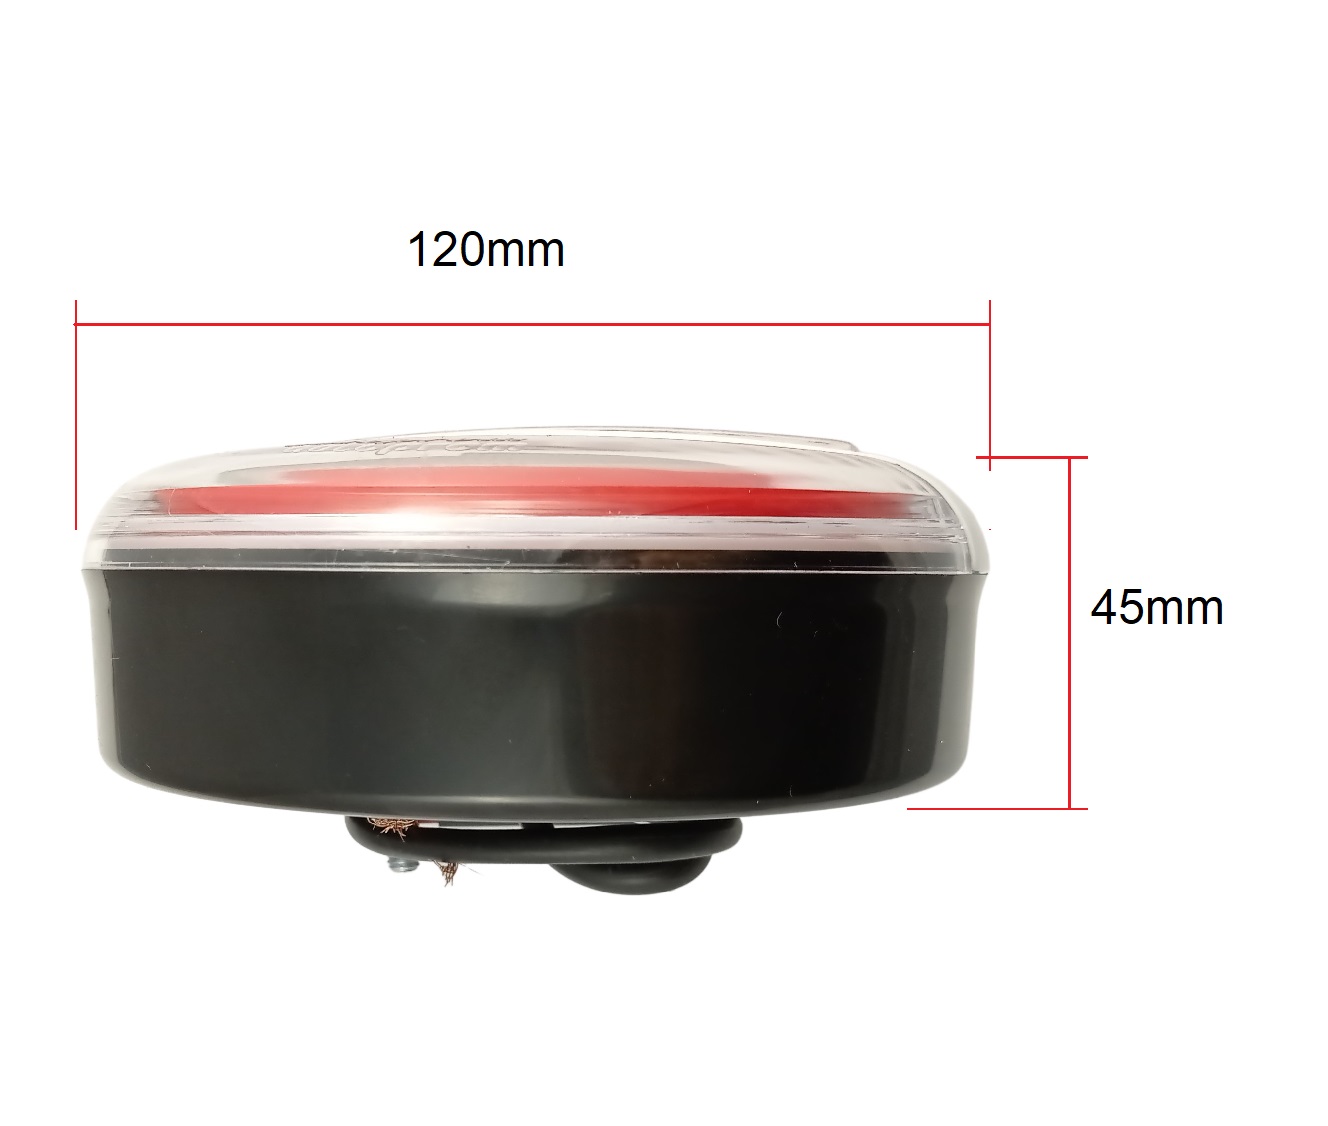  Led Rear Tail Reverse Round Neon Lights Trailer Lorry 12v 120mm